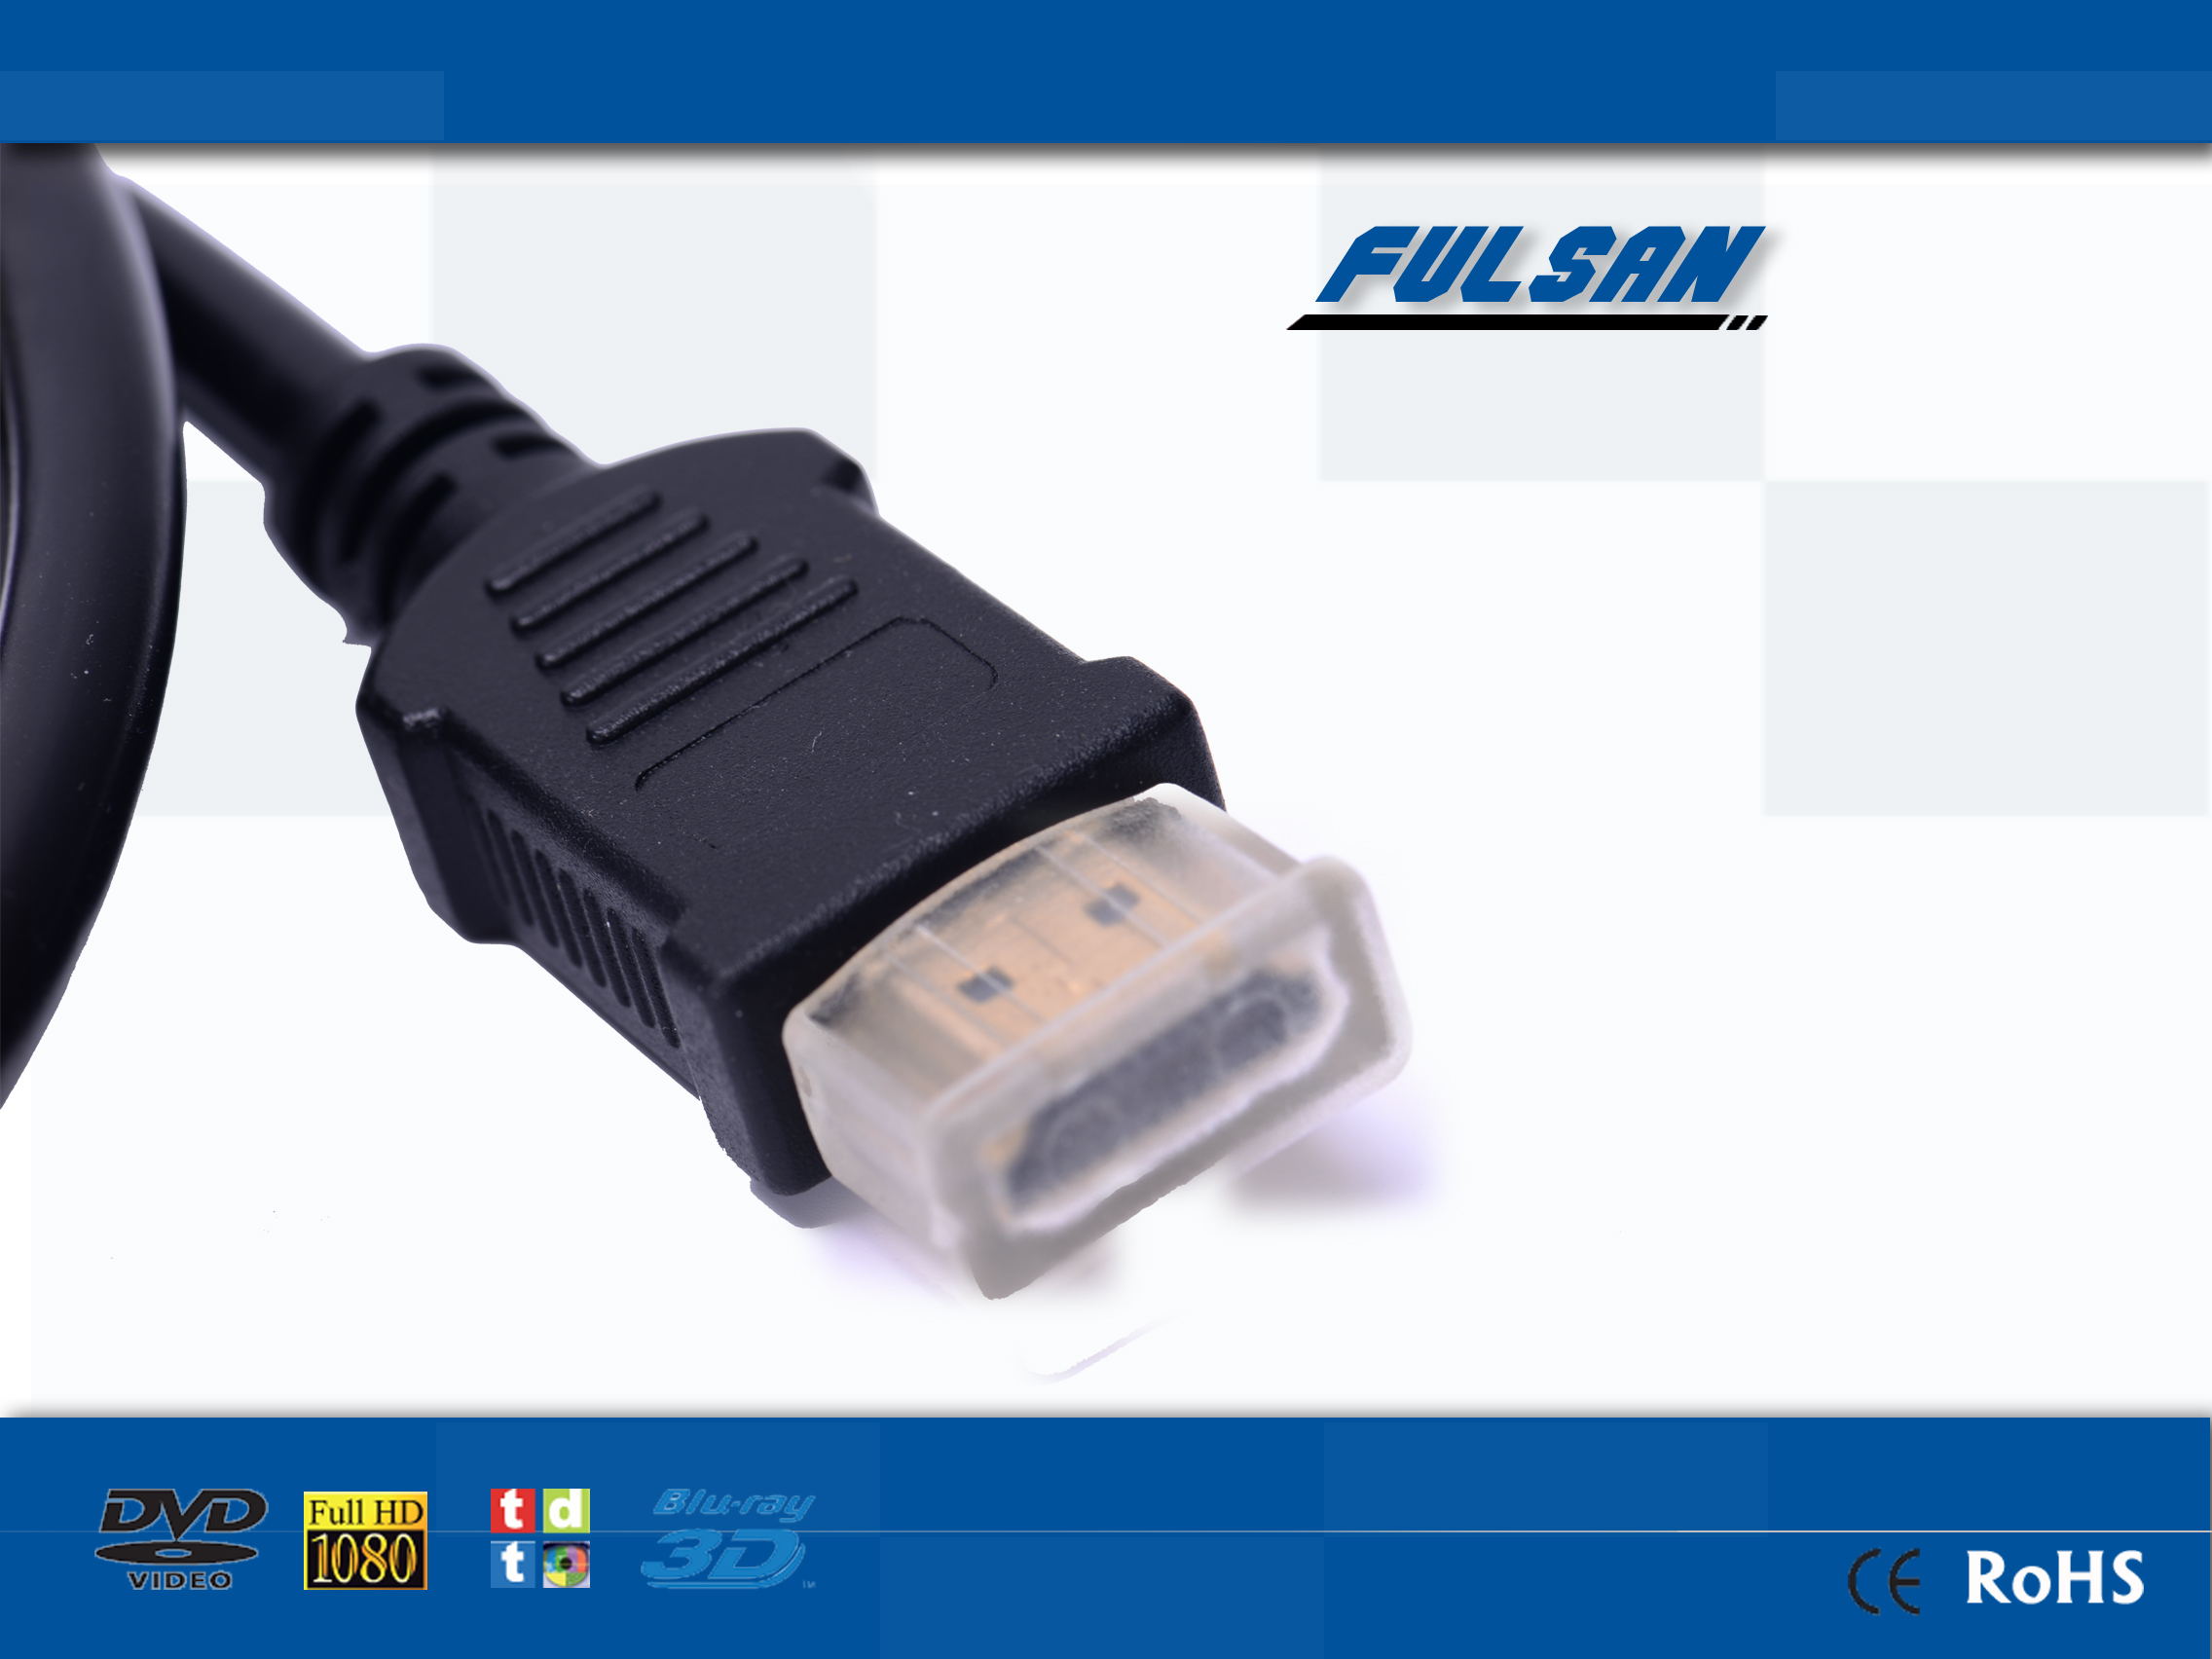 new product DVD TV 4K pure copper hdmi cable 0.5m 